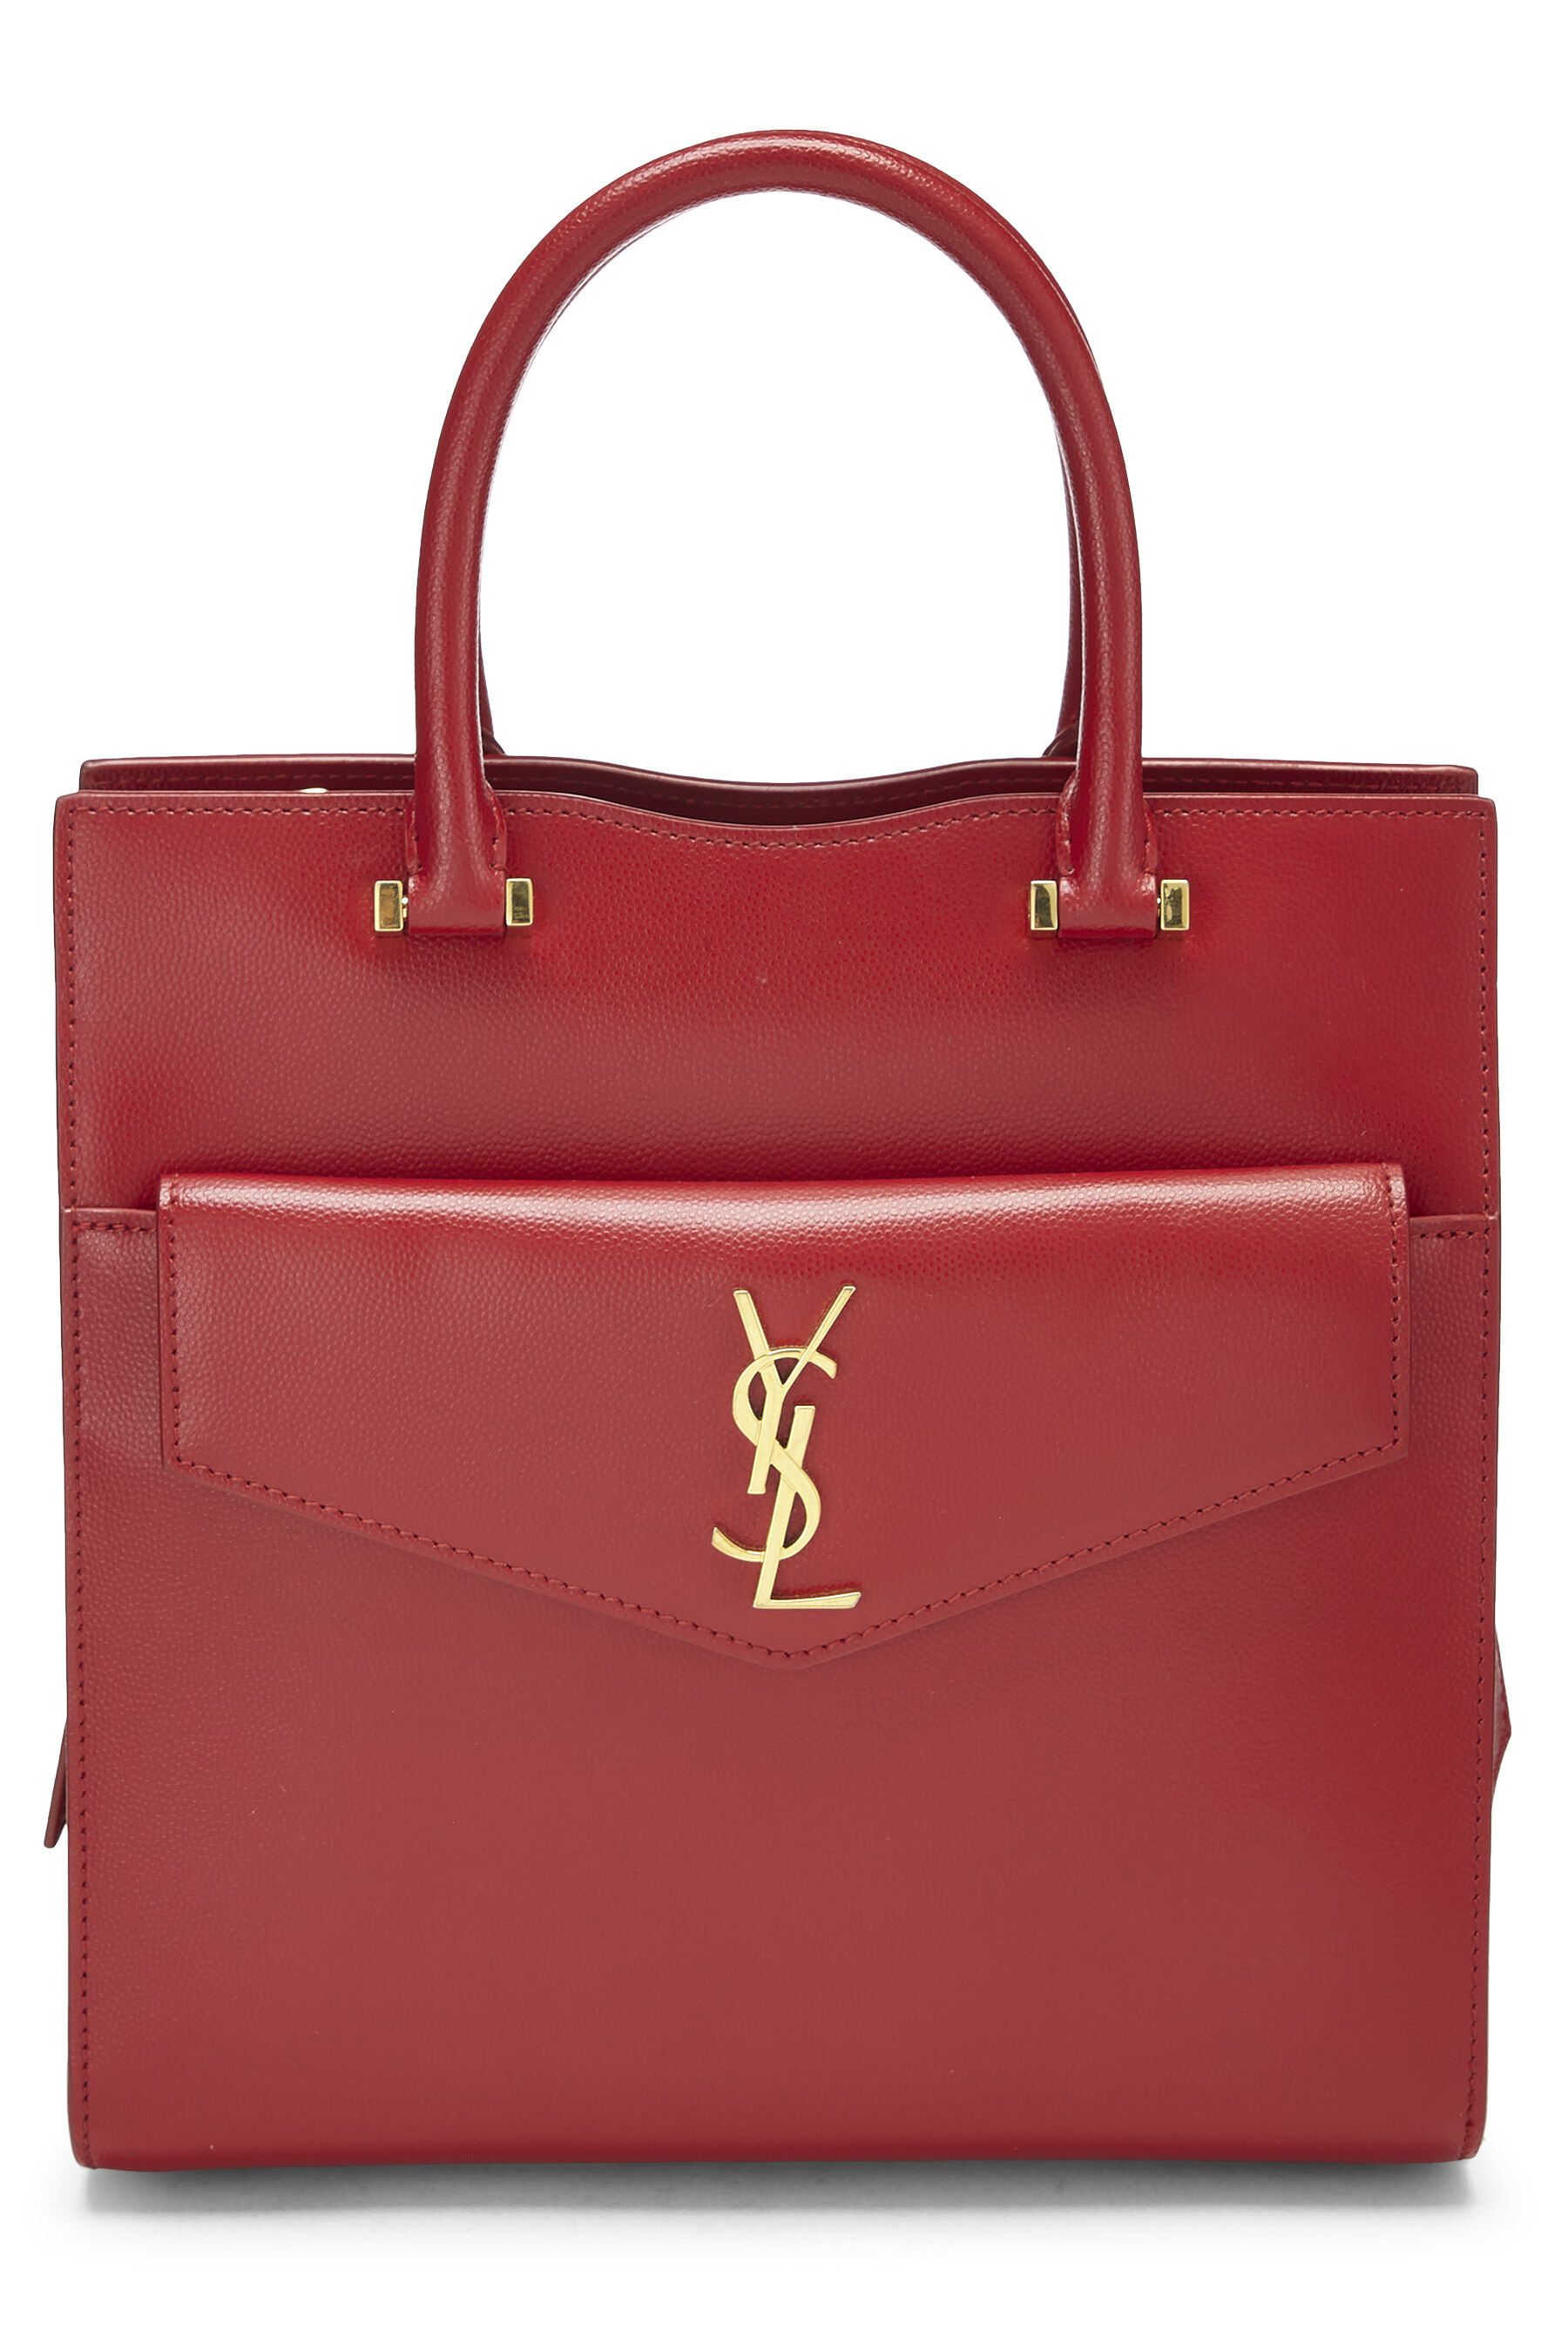 Ysl - Red Grainy Uptown Tote Small